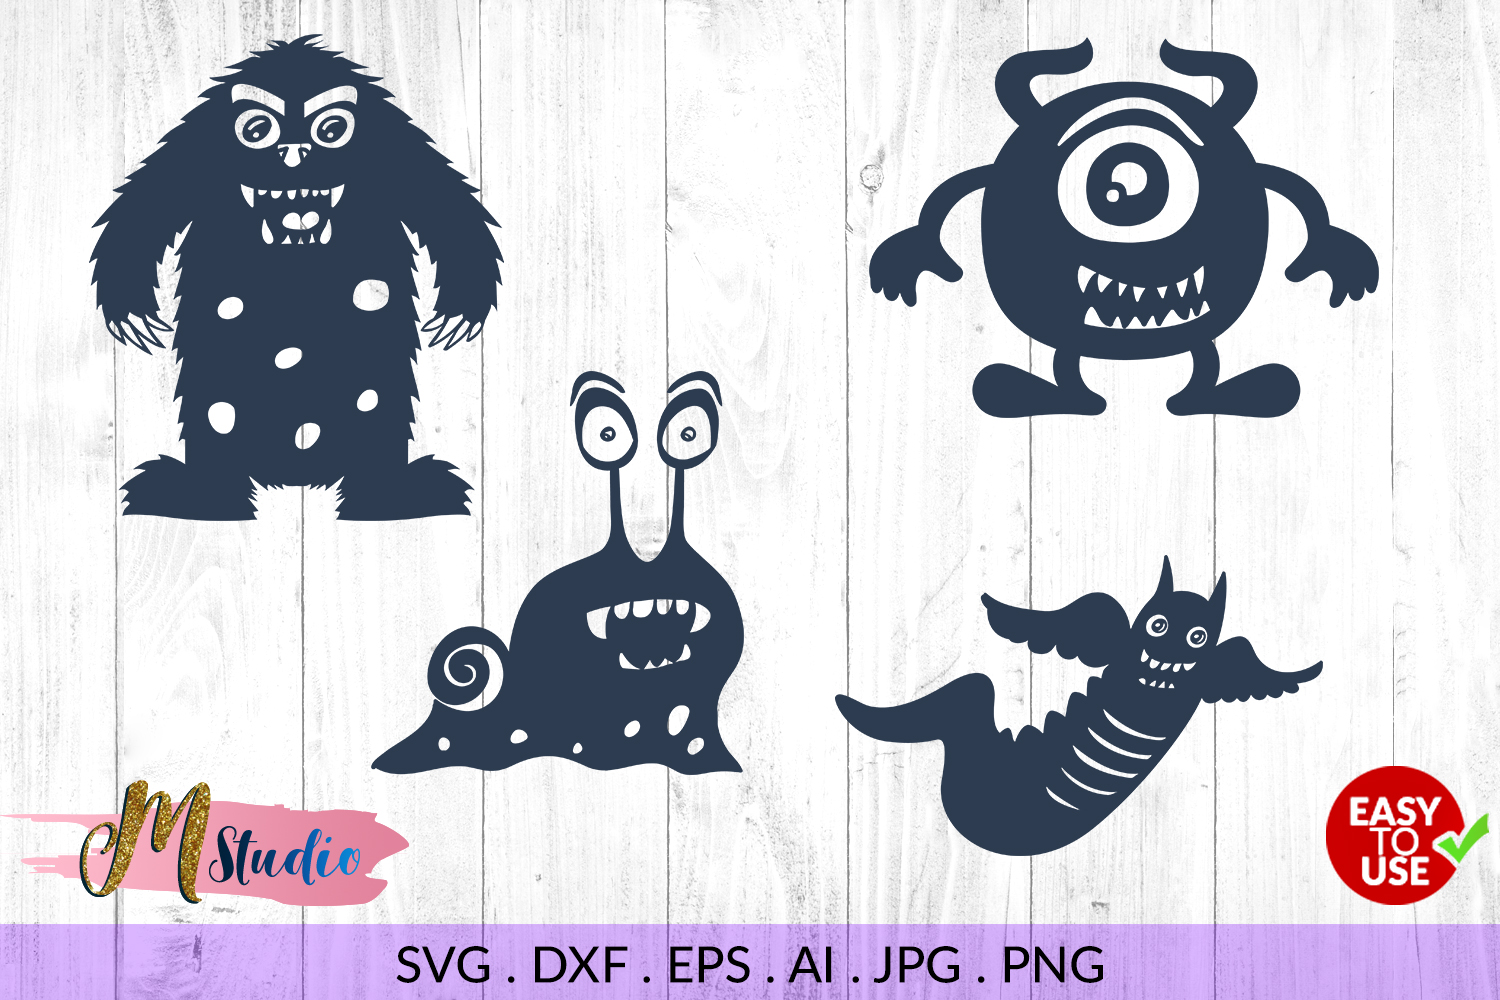 Monsters svg, halloween svg, for Silhouette Cameo or Cricut. (131933